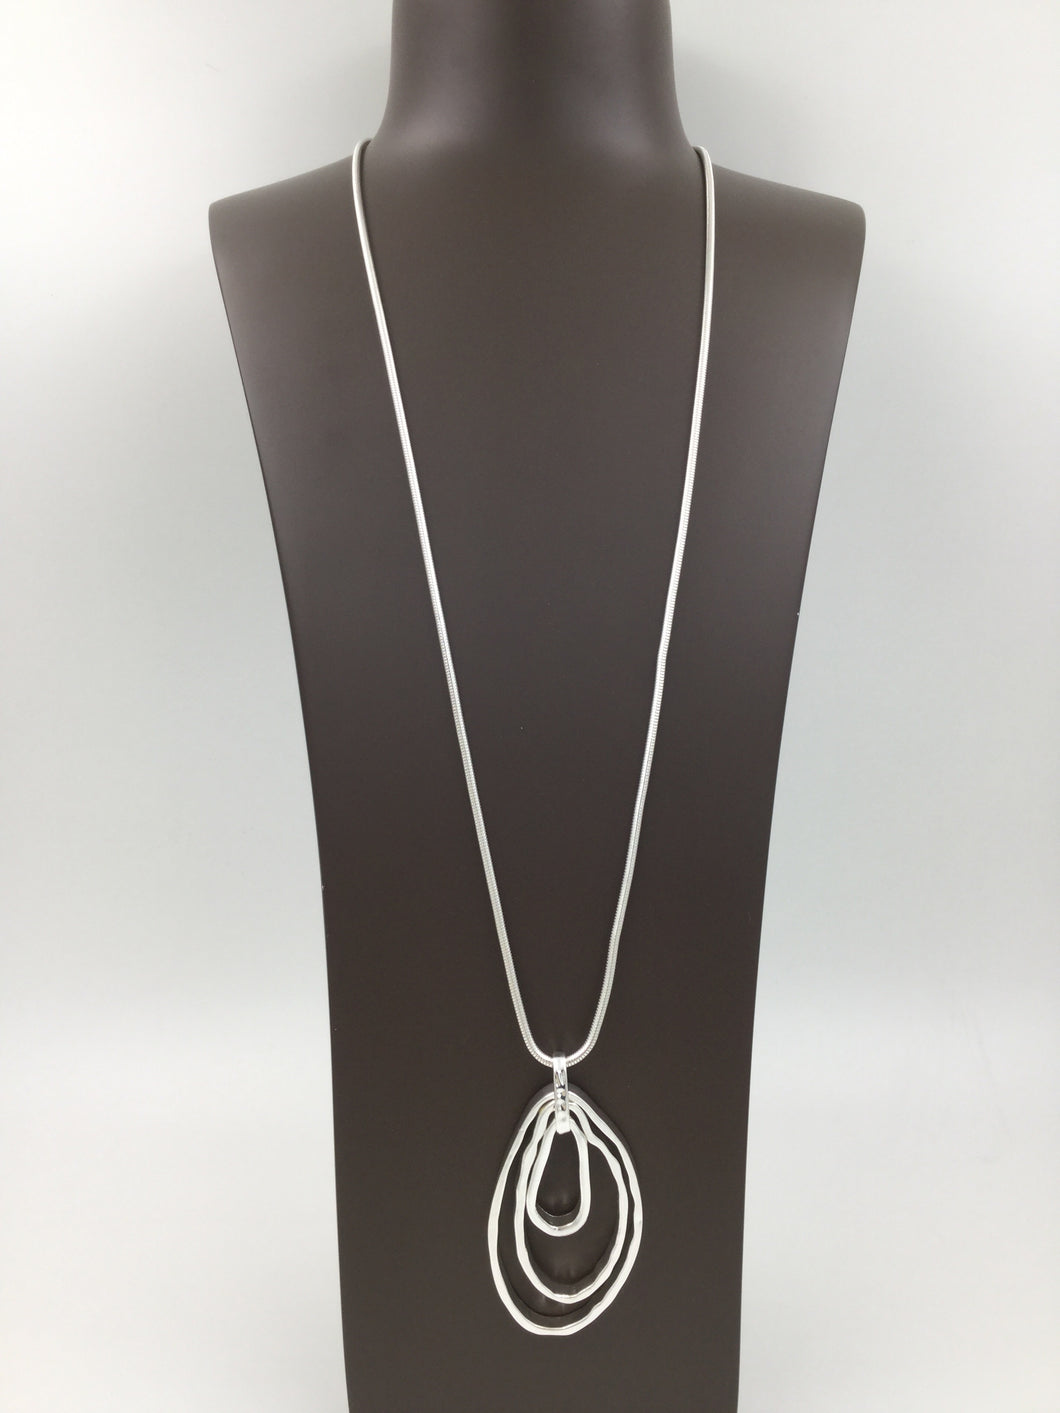 Long Oval Necklace with Two Oval Shapes Inside